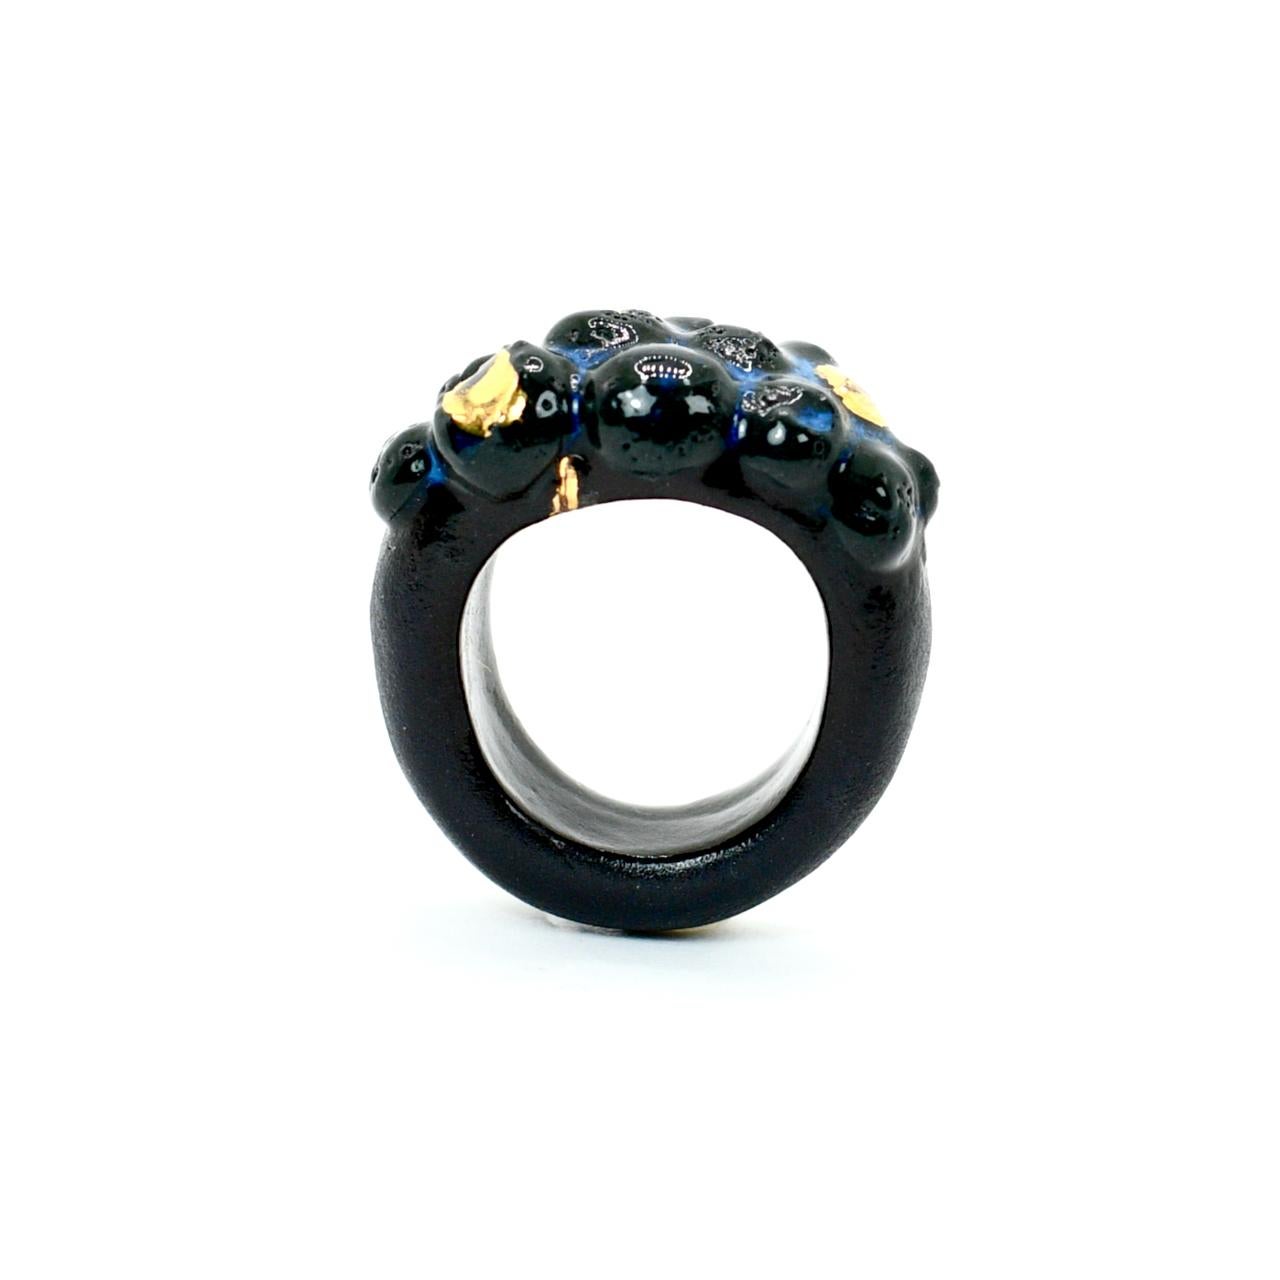 Black porcelain  24K gold  Handmade in London 

Introducing the DIRION Black Porcelain Ring - a wearable sculpture of black onyx porcelain and 24k gold. The sculptural surface, adorned with a blue glaze, evokes the beauty of rivers flowing between